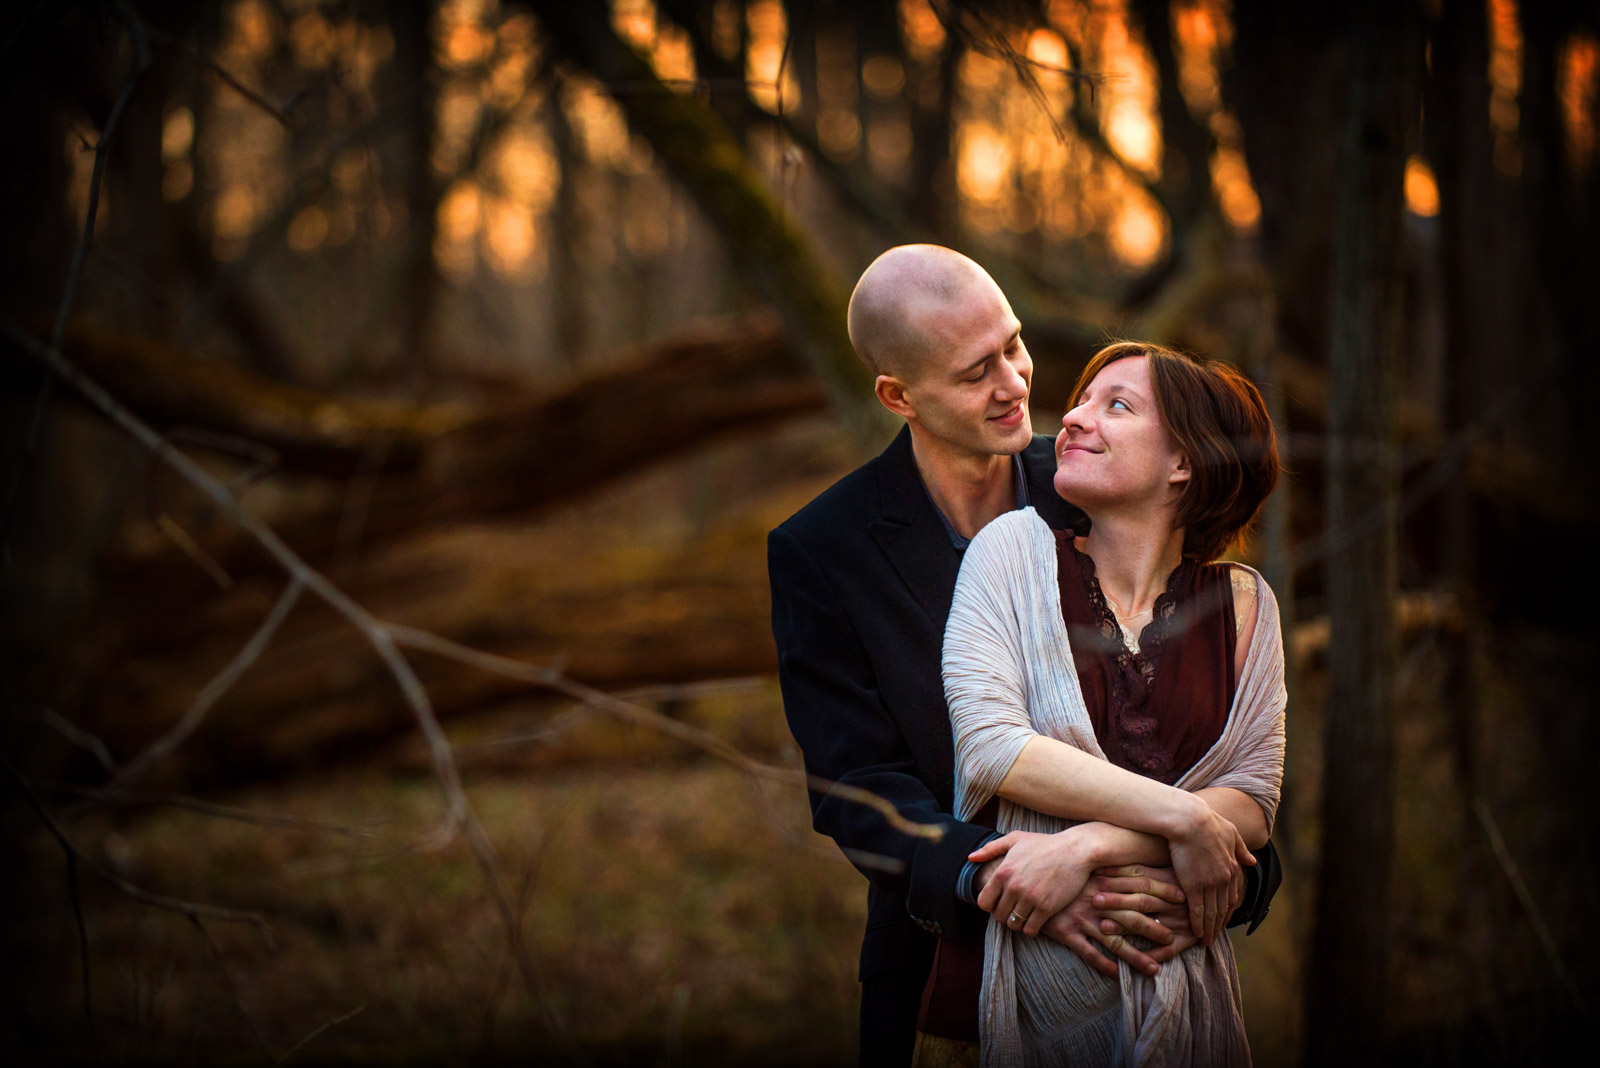 Engagement Session in Chicago suburbs at sunset in forest preserve